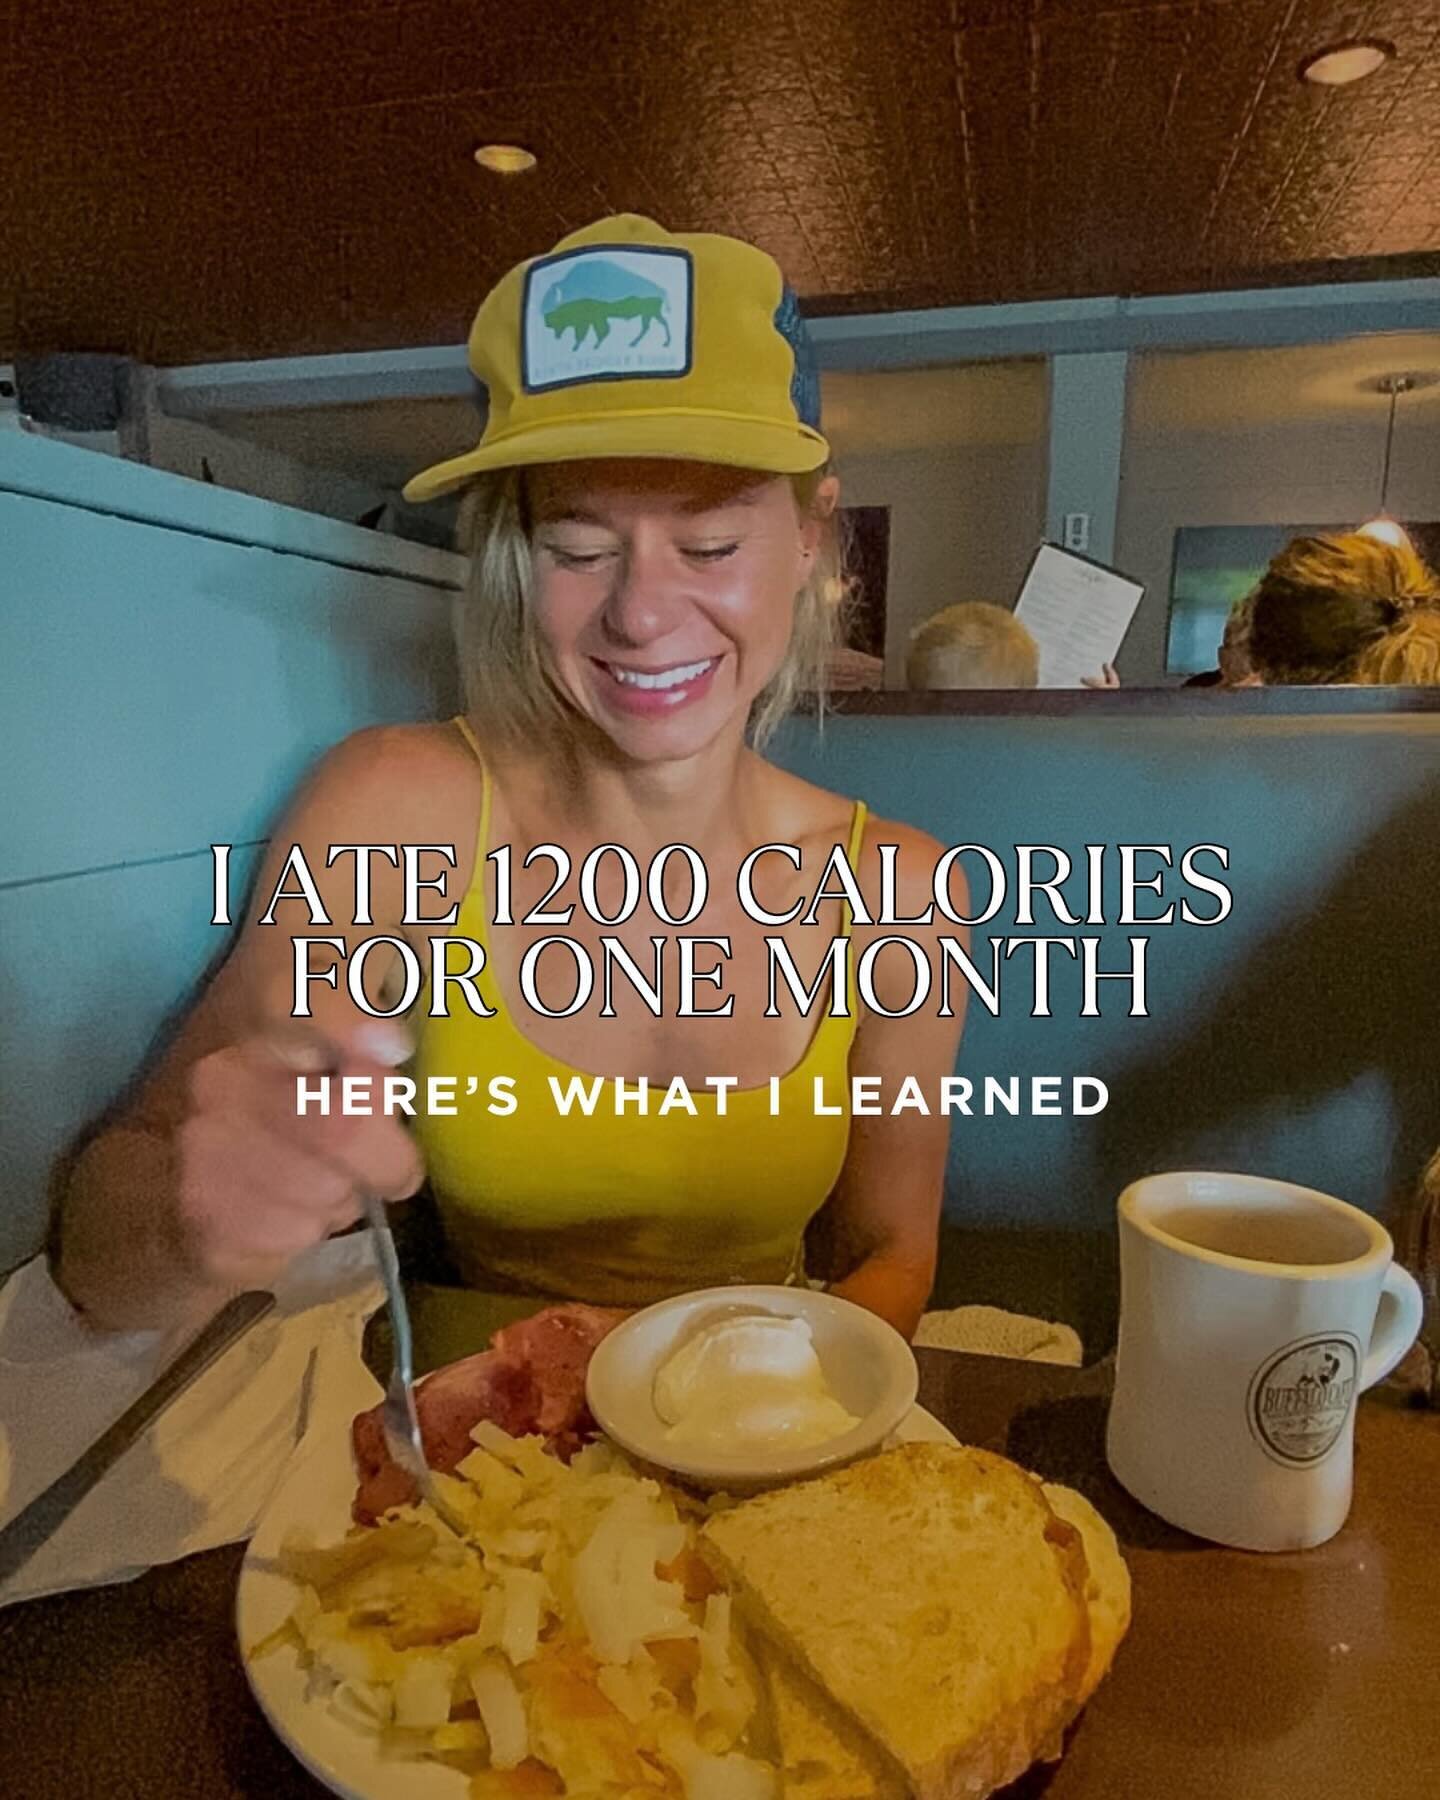 It&rsquo;s not enough food.

1200 calories while trying to workout and do life is a terrible feeling. 

Not only that, when you deprive your body of the energy {food} it needs to do the work you&rsquo;re demanding of it you end up  with a wrecked ner